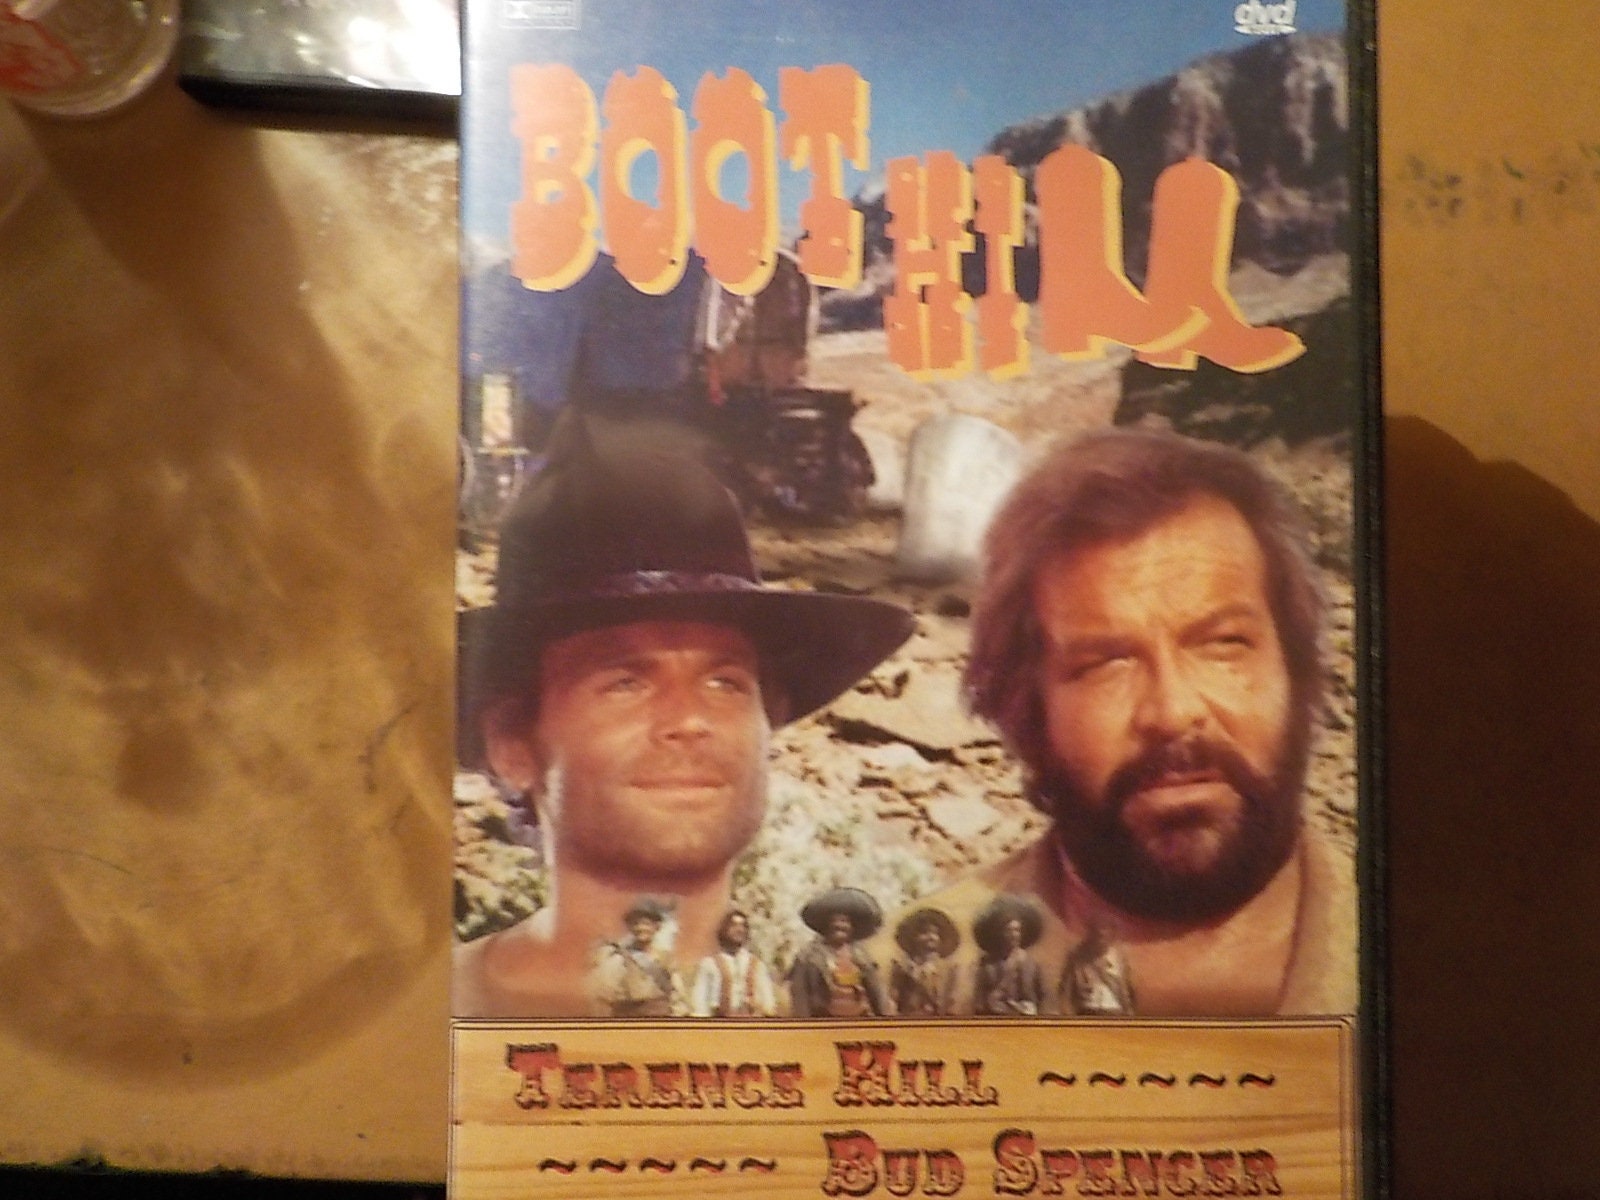 Boot Hill Terence Hill Western Classic DVD Movie Show Rated PG - Etsy